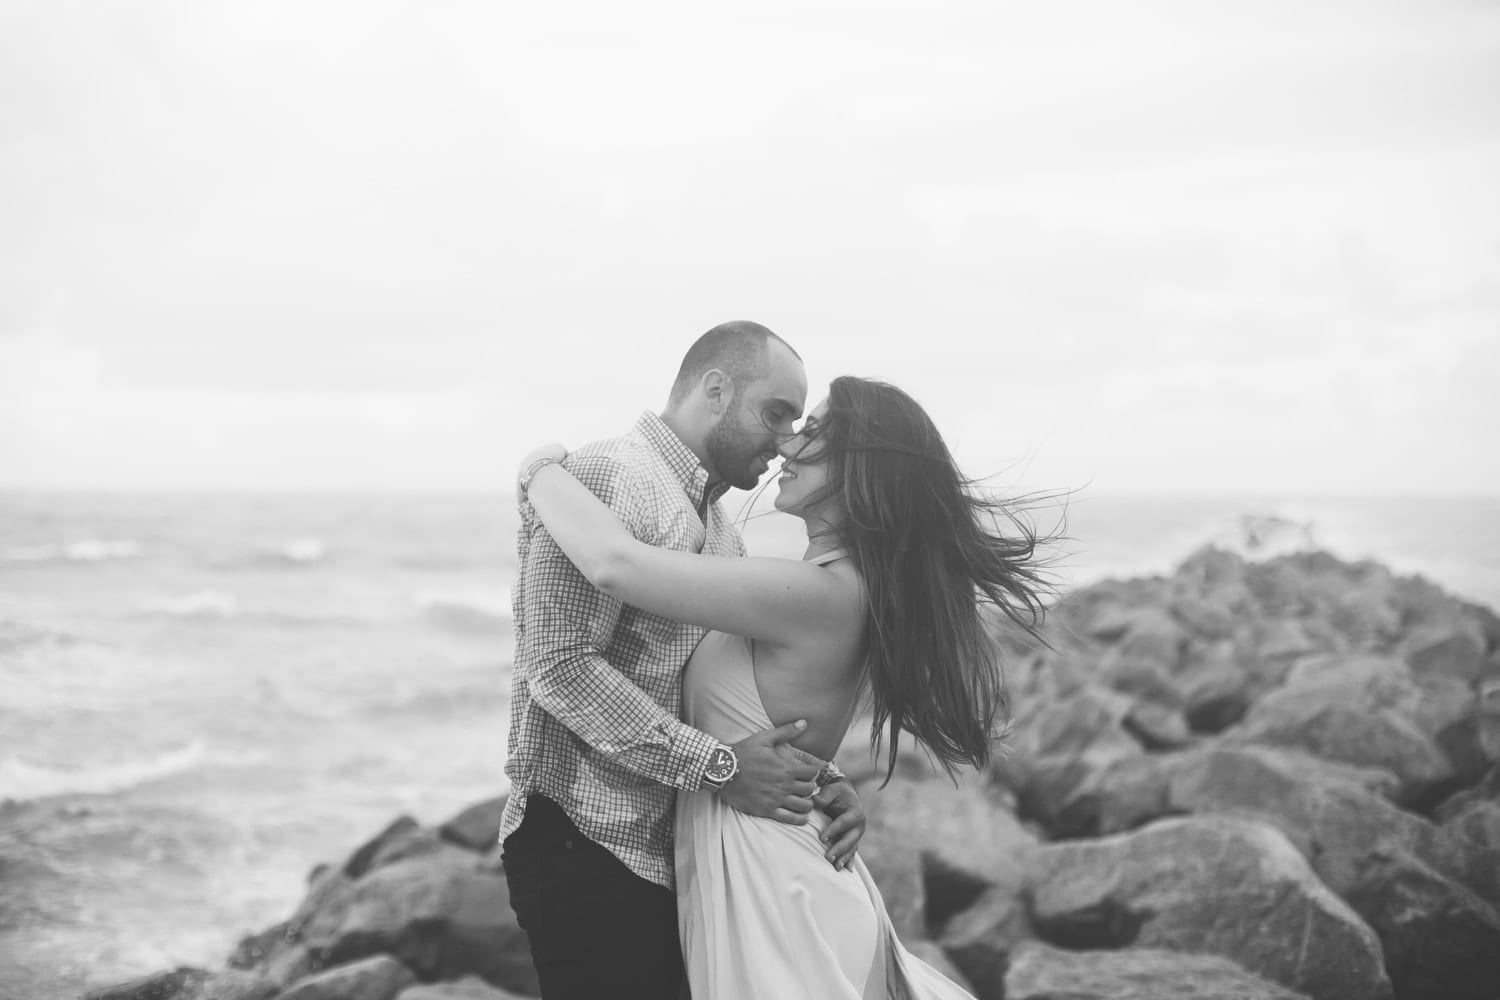 Miami Engagement Photos at South Pointe Park